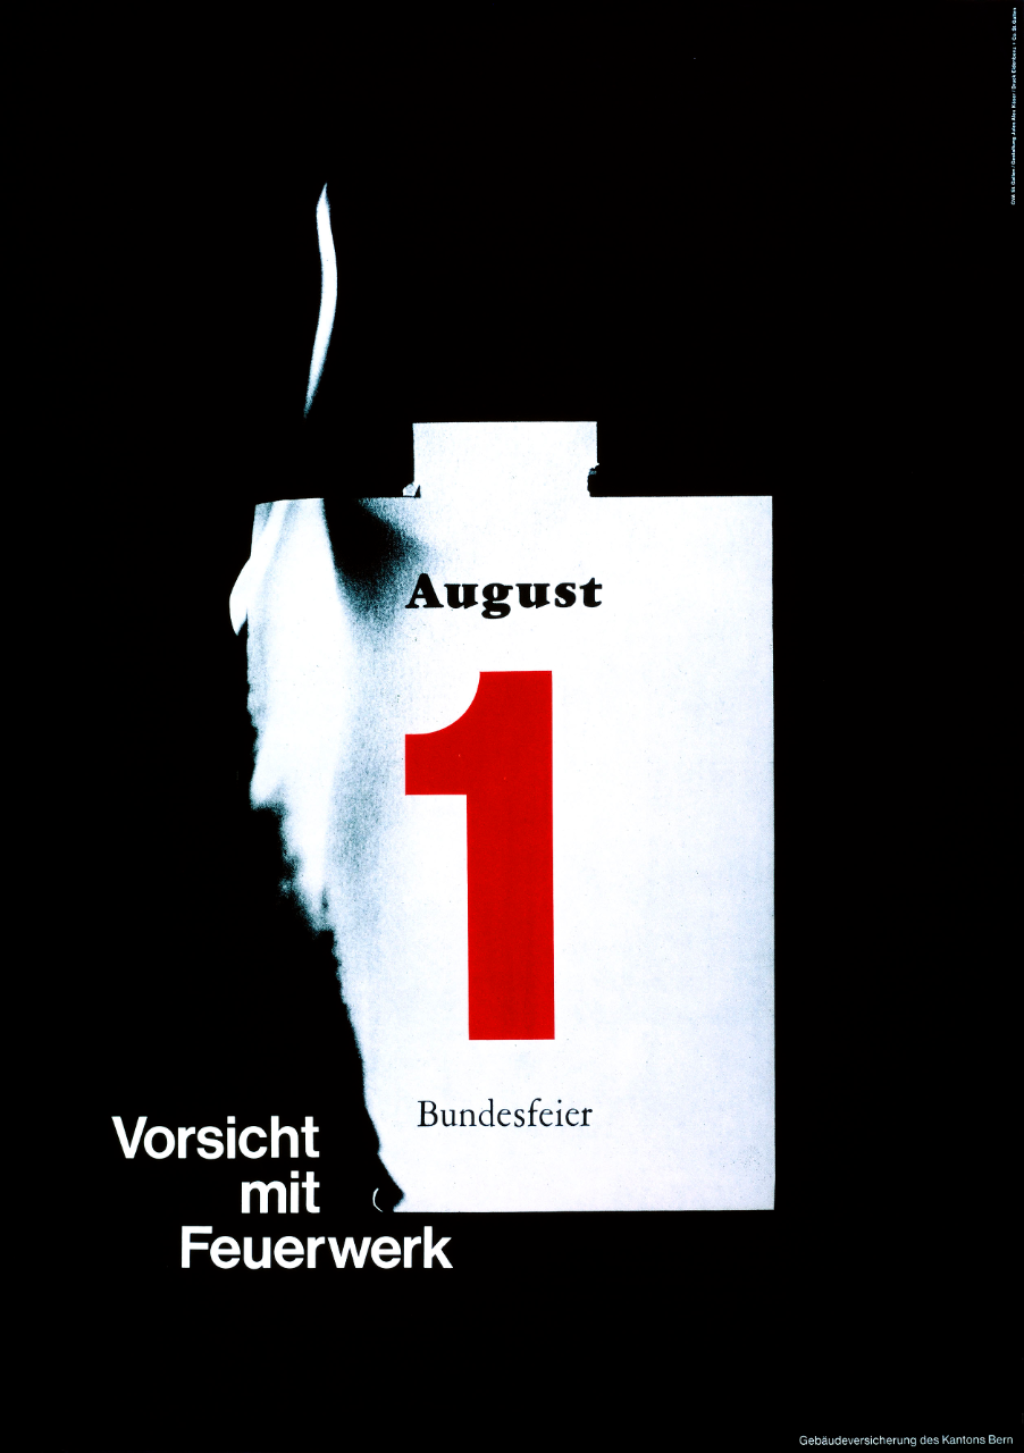 The picture shows a calendar page for 1 August, with “Swiss National Day” inscribed across the bottom. The left-hand edge of the page is partly burnt away, and a hint of flame can be seen flickering from it and into the black background. The legend “Handle fireworks with care” is at bottom left.